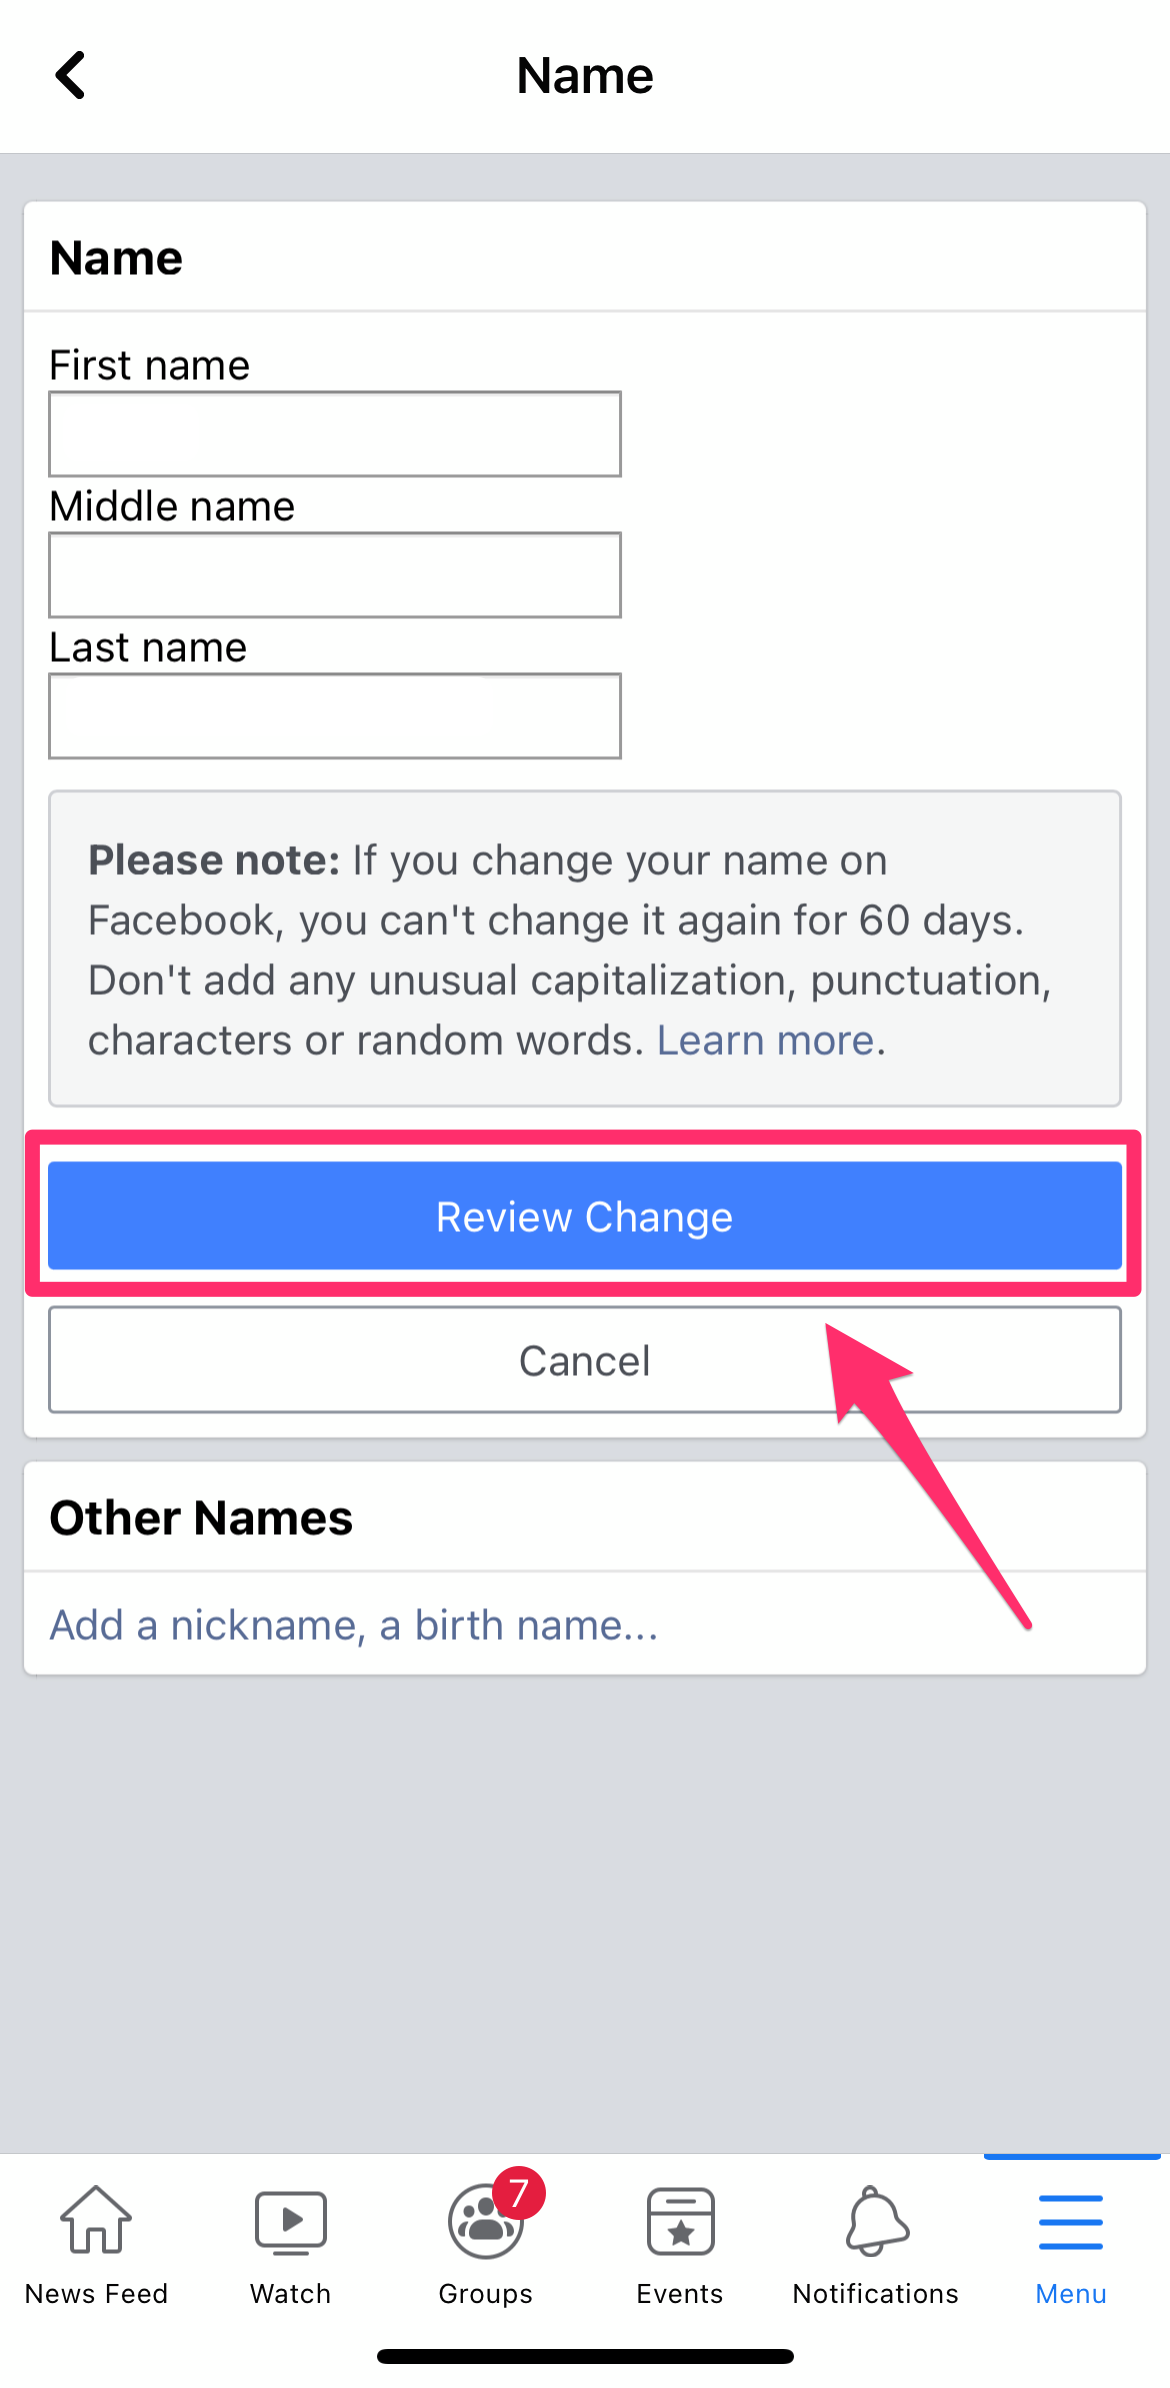 Screenshot of Facebook app Name change page with Review Change highlighted